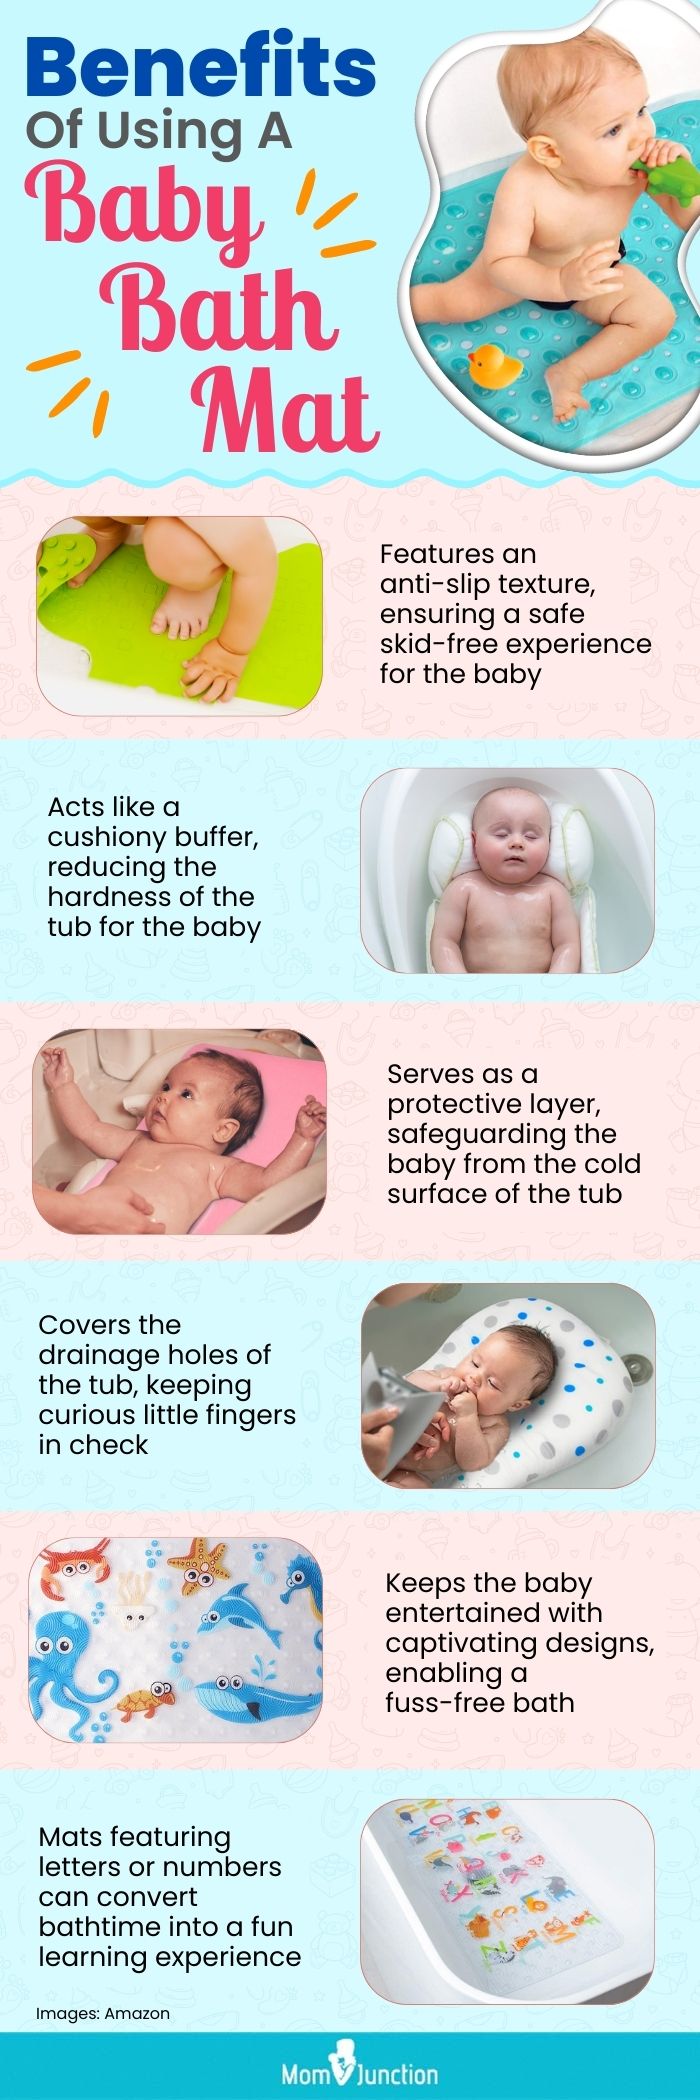 Benefits Of Using A Baby Bath Mat (infographic)